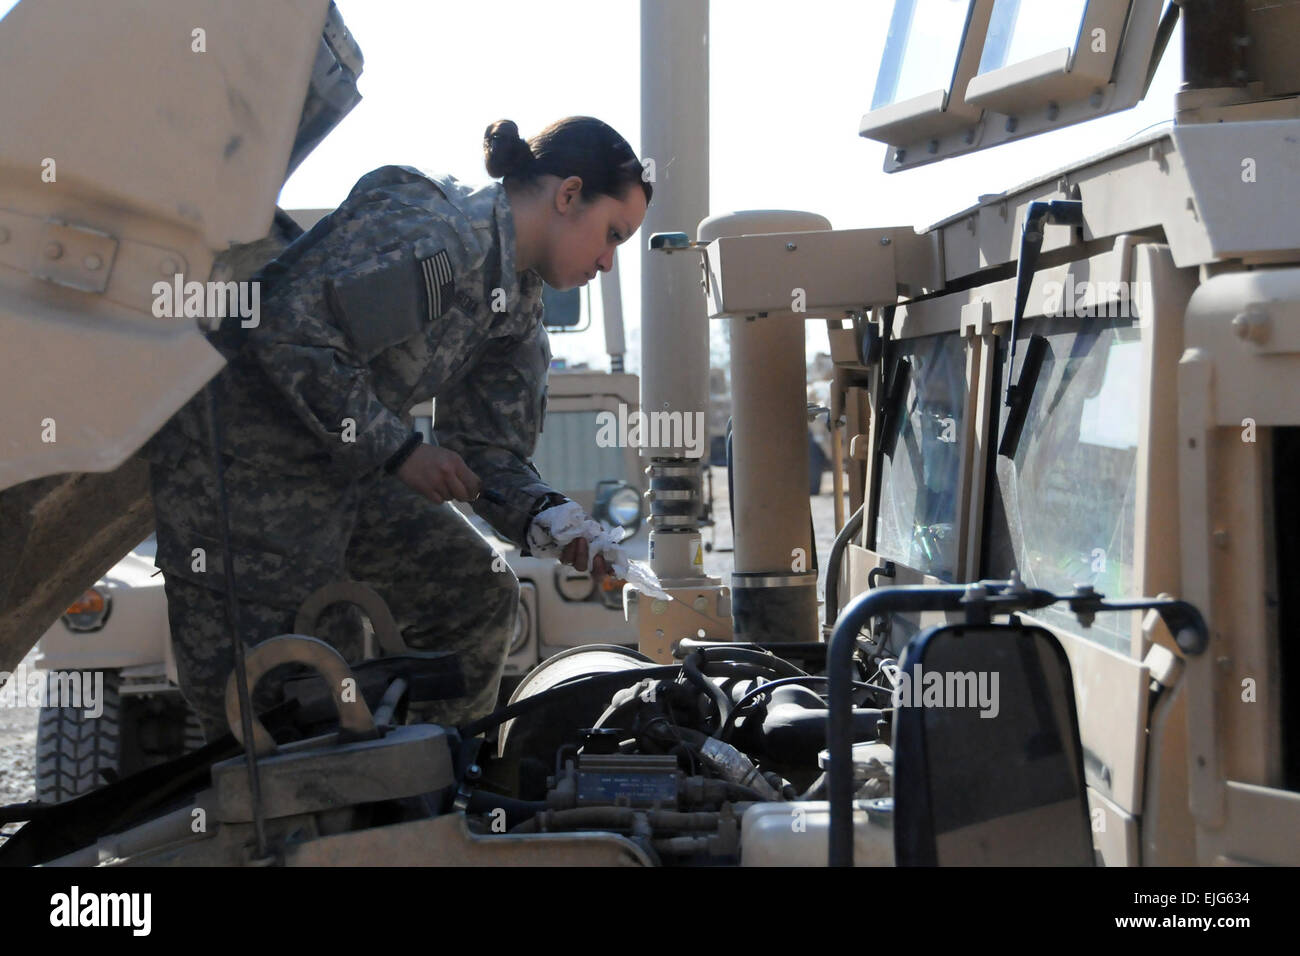 Spc. Soledad Siordia, a driver with Bravo Company, 1-185th Armor Combined Arms Battalion, 81st Brigade Combat Team, California Army National Guard, conducts maintenance on a vehicle Feb. 5, 2009 at Contingency Operating Base Speicher, Iraq.  About 900 California National Guardsmen deployed with the 81st BCT based out of Seattle in support of Operation Iraqi Freedom in August.  They are scheduled to return home this summer. Stock Photo